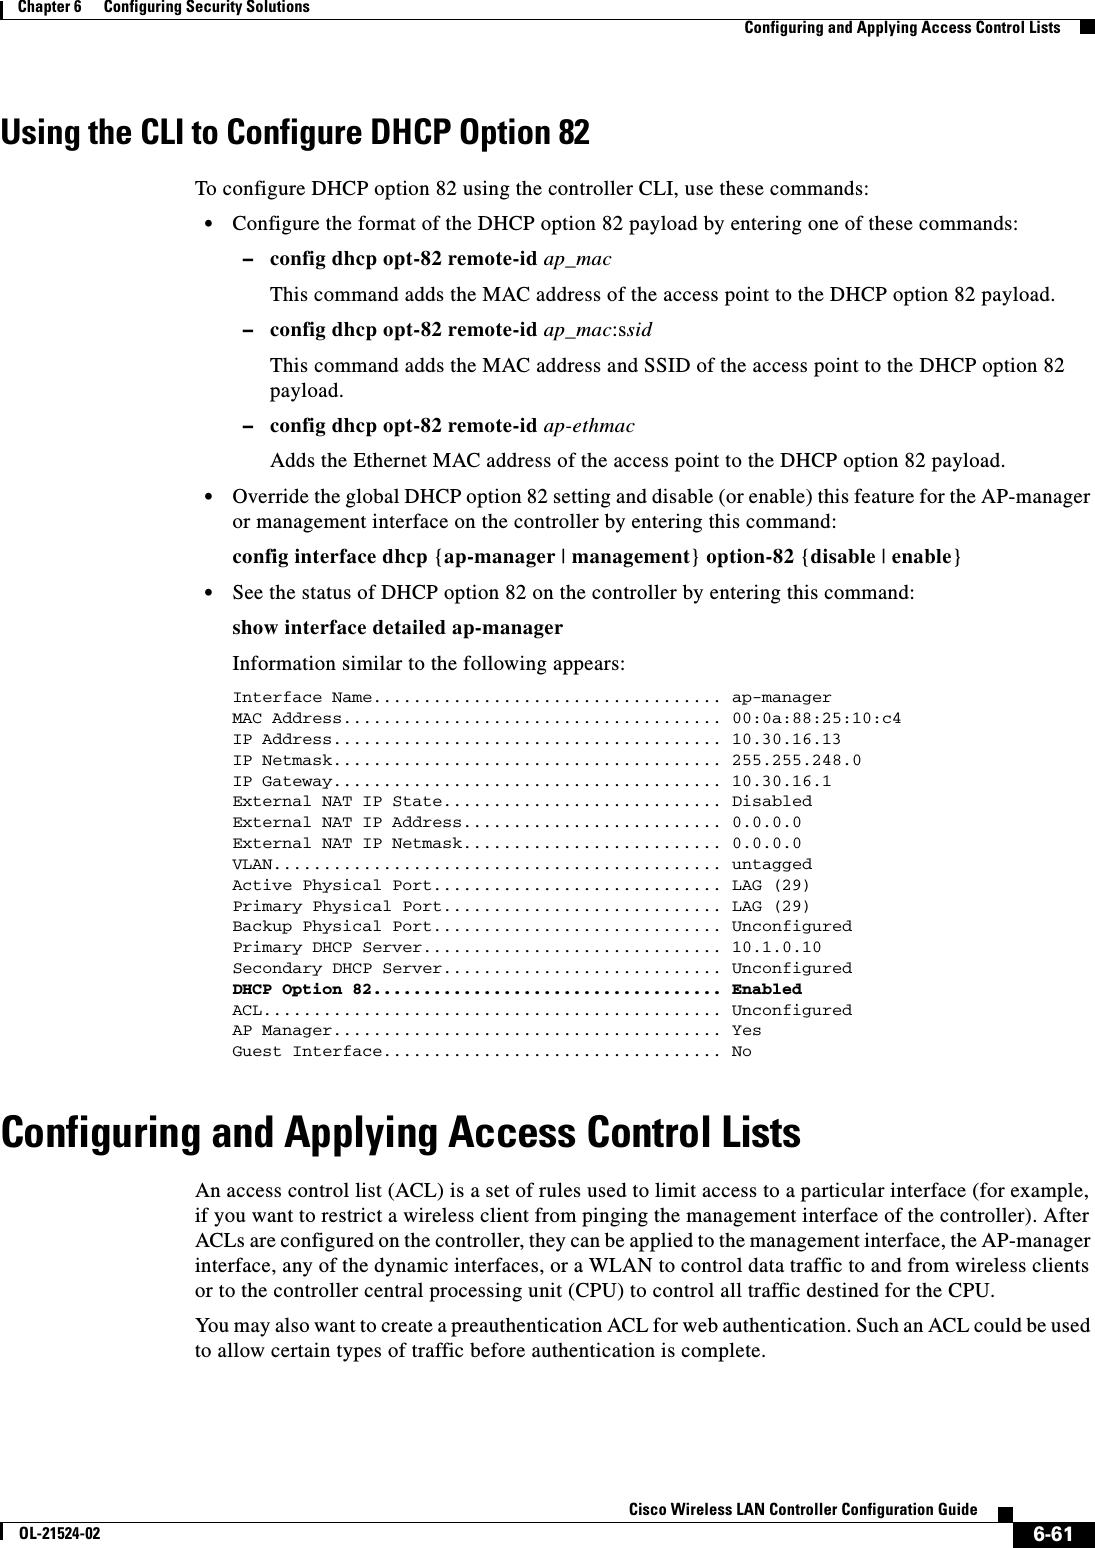  6-61Cisco Wireless LAN Controller Configuration GuideOL-21524-02Chapter 6      Configuring Security Solutions  Configuring and Applying Access Control ListsUsing the CLI to Configure DHCP Option 82To configure DHCP option 82 using the controller CLI, use these commands:  • Configure the format of the DHCP option 82 payload by entering one of these commands:  –config dhcp opt-82 remote-id ap_macThis command adds the MAC address of the access point to the DHCP option 82 payload.  –config dhcp opt-82 remote-id ap_mac:ssidThis command adds the MAC address and SSID of the access point to the DHCP option 82 payload.  –config dhcp opt-82 remote-id ap-ethmacAdds the Ethernet MAC address of the access point to the DHCP option 82 payload.  • Override the global DHCP option 82 setting and disable (or enable) this feature for the AP-manager or management interface on the controller by entering this command:config interface dhcp {ap-manager | management} option-82 {disable | enable}  • See the status of DHCP option 82 on the controller by entering this command:show interface detailed ap-managerInformation similar to the following appears:Interface Name................................... ap-managerMAC Address...................................... 00:0a:88:25:10:c4IP Address....................................... 10.30.16.13IP Netmask....................................... 255.255.248.0IP Gateway....................................... 10.30.16.1External NAT IP State............................ DisabledExternal NAT IP Address.......................... 0.0.0.0External NAT IP Netmask.......................... 0.0.0.0VLAN............................................. untaggedActive Physical Port............................. LAG (29)Primary Physical Port............................ LAG (29)Backup Physical Port............................. UnconfiguredPrimary DHCP Server.............................. 10.1.0.10Secondary DHCP Server............................ UnconfiguredDHCP Option 82................................... EnabledACL.............................................. UnconfiguredAP Manager....................................... YesGuest Interface.................................. NoConfiguring and Applying Access Control ListsAn access control list (ACL) is a set of rules used to limit access to a particular interface (for example, if you want to restrict a wireless client from pinging the management interface of the controller). After ACLs are configured on the controller, they can be applied to the management interface, the AP-manager interface, any of the dynamic interfaces, or a WLAN to control data traffic to and from wireless clients or to the controller central processing unit (CPU) to control all traffic destined for the CPU.You may also want to create a preauthentication ACL for web authentication. Such an ACL could be used to allow certain types of traffic before authentication is complete.